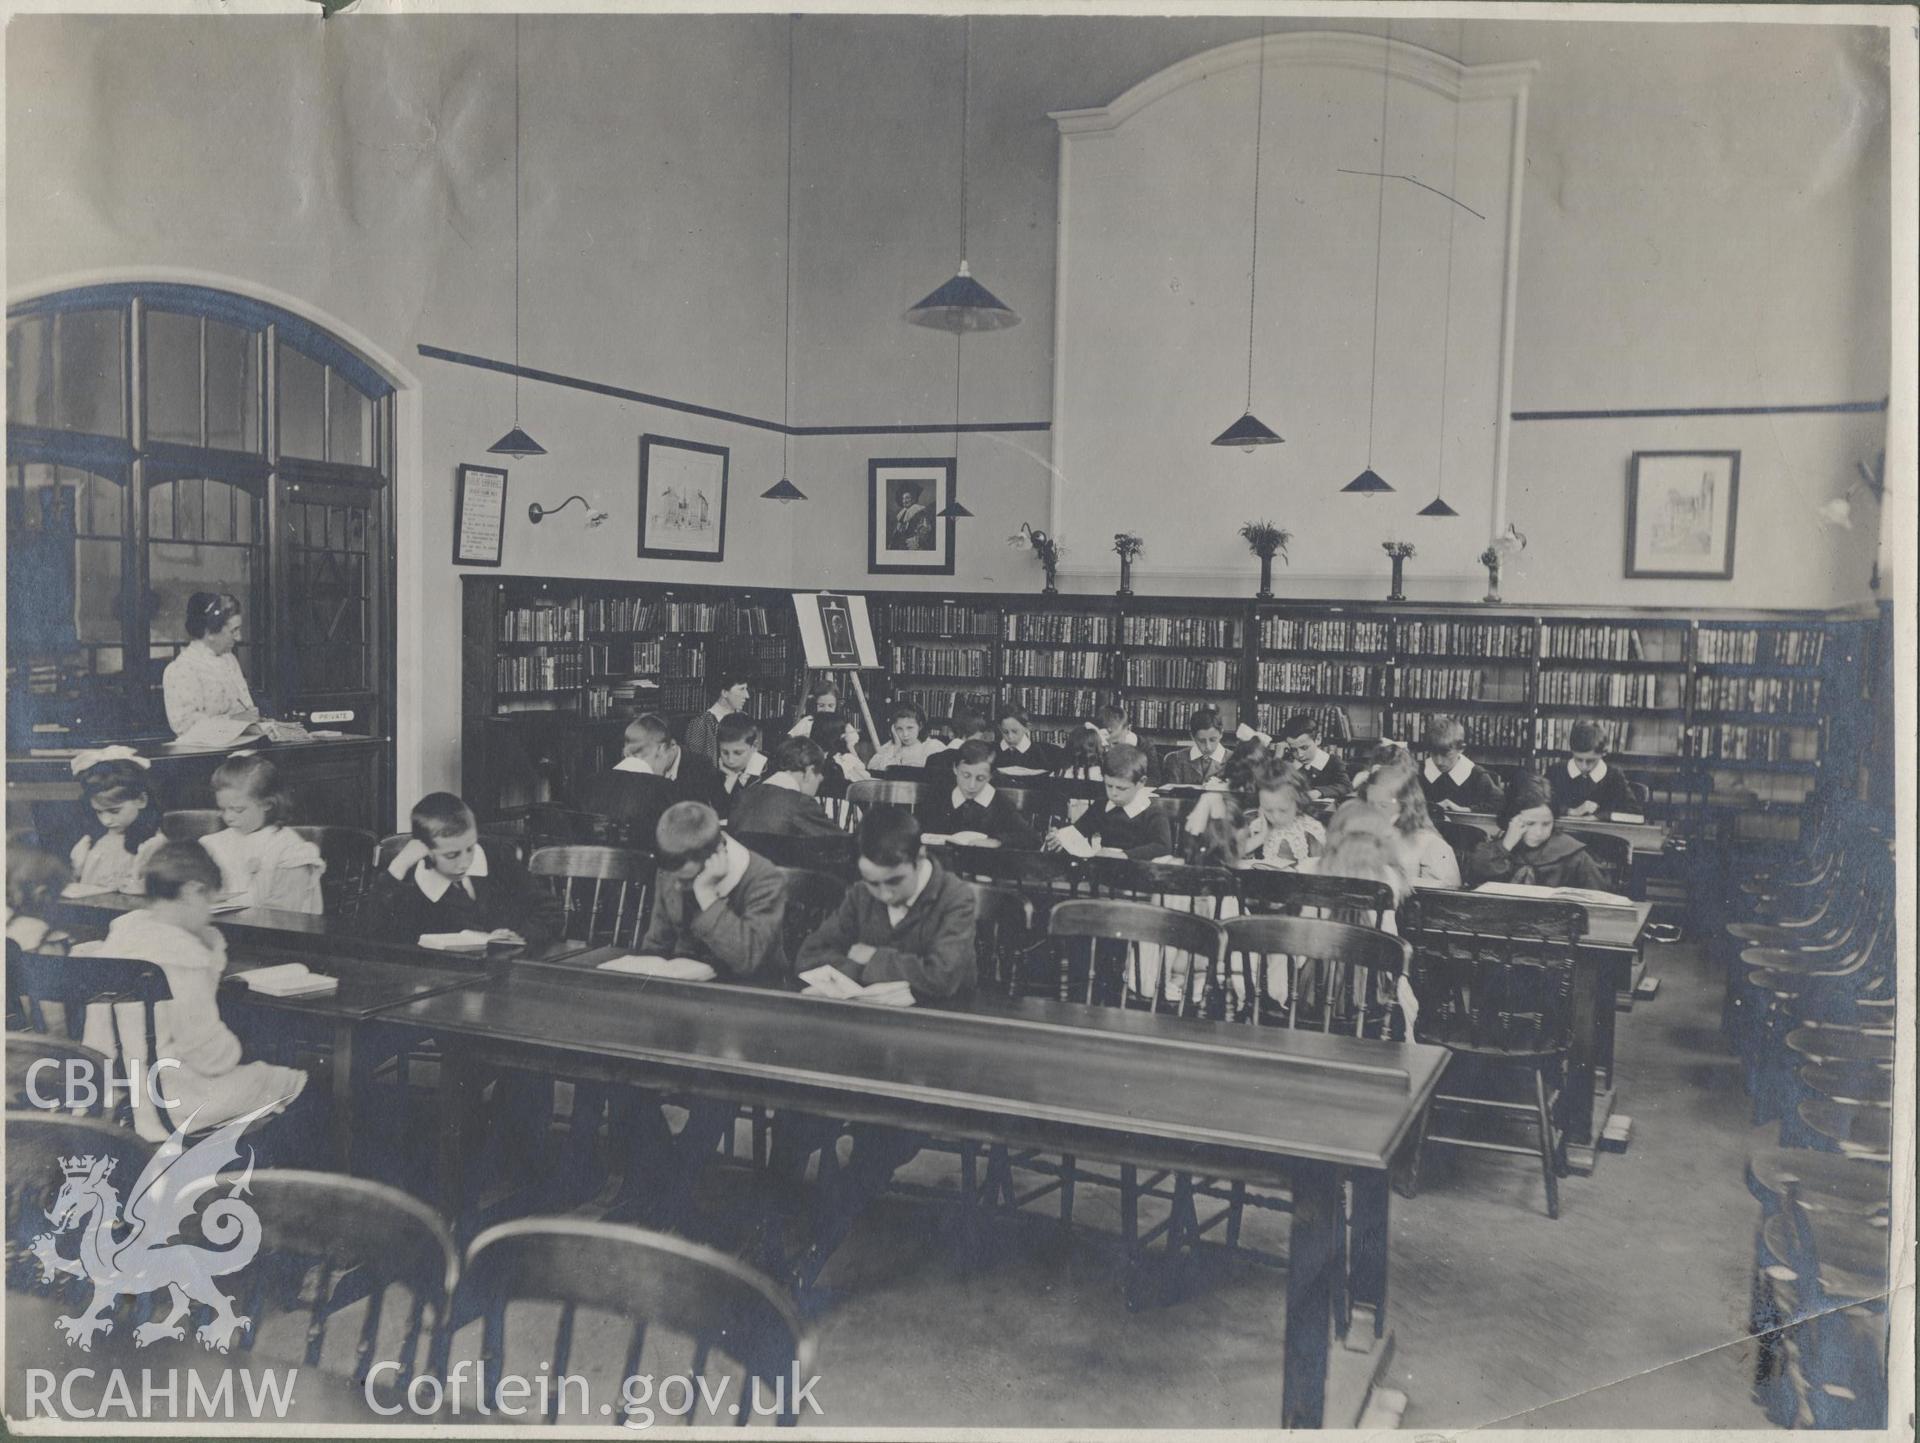 Black and white photograph showing school children working in Cathays Public Library, Cardiff.